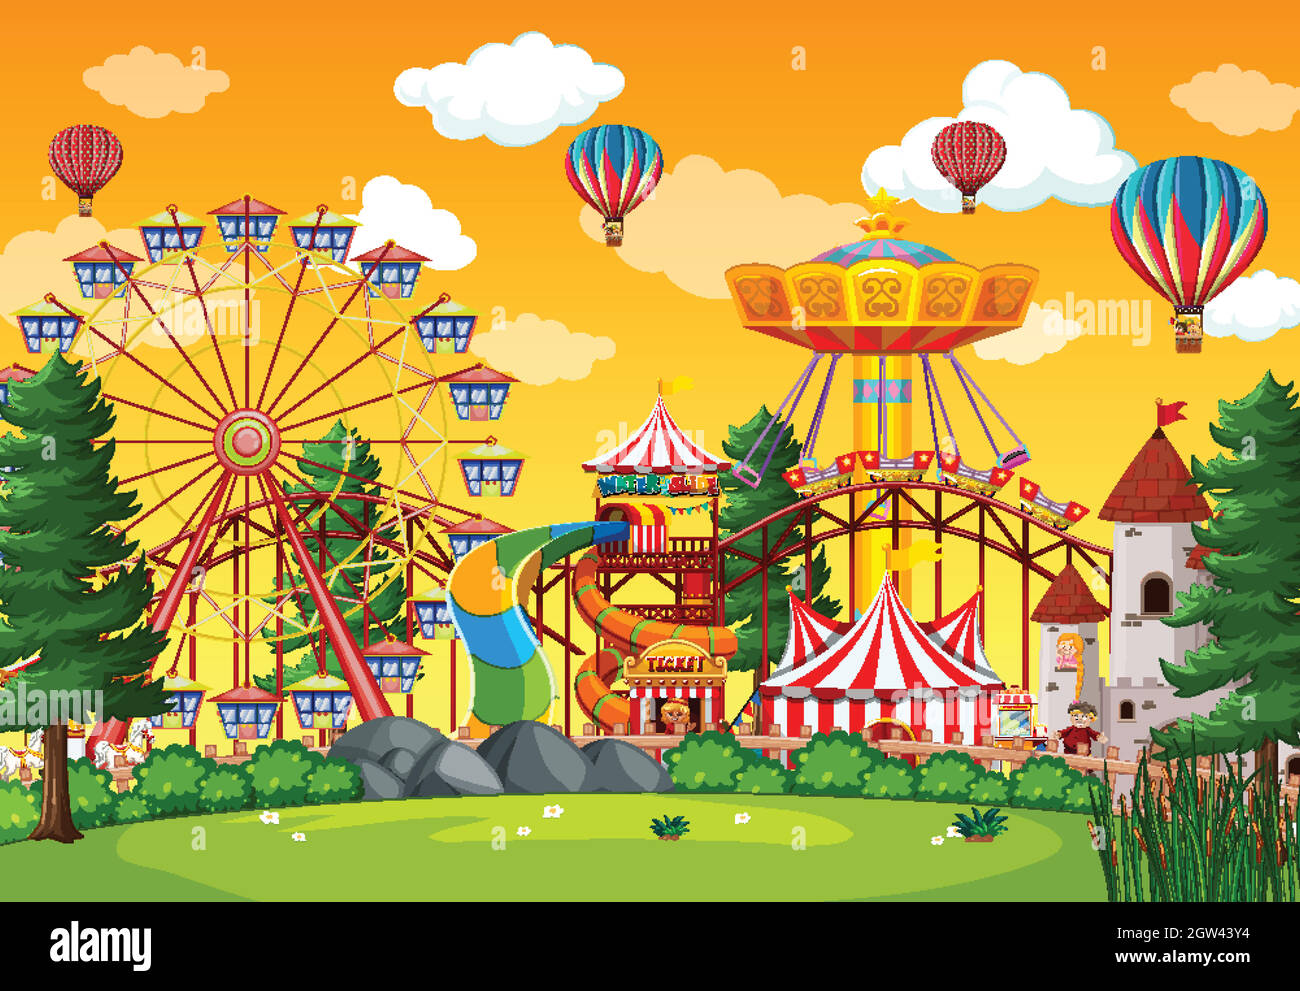 Amusement park scene at daytime with rainbow Vector Image